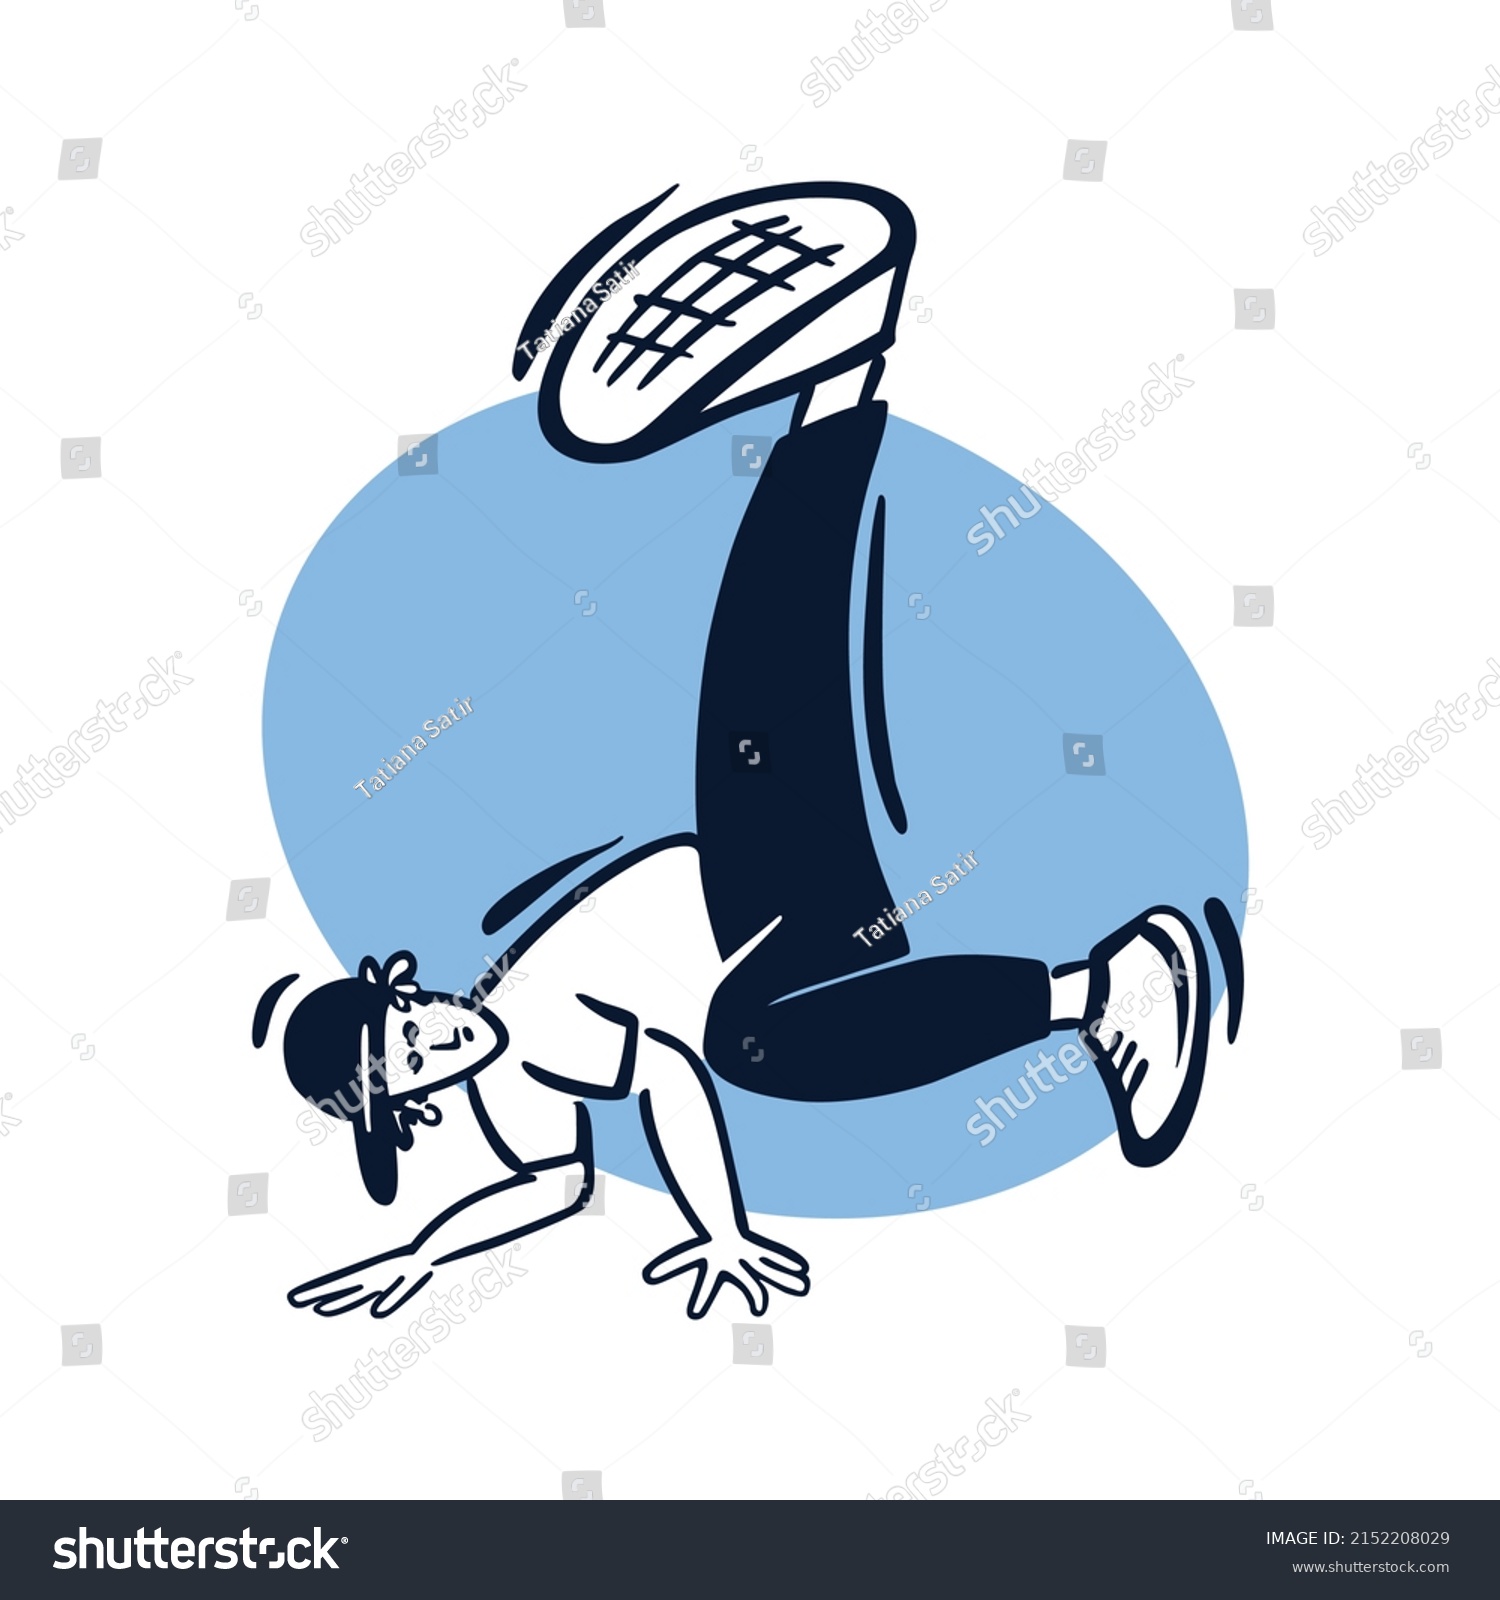 SVG of Break dancer performing stunts. B-boy jumping. Street dance boomerang move. Black and white character on blue circle background. Sketch style vector design illustrations. svg